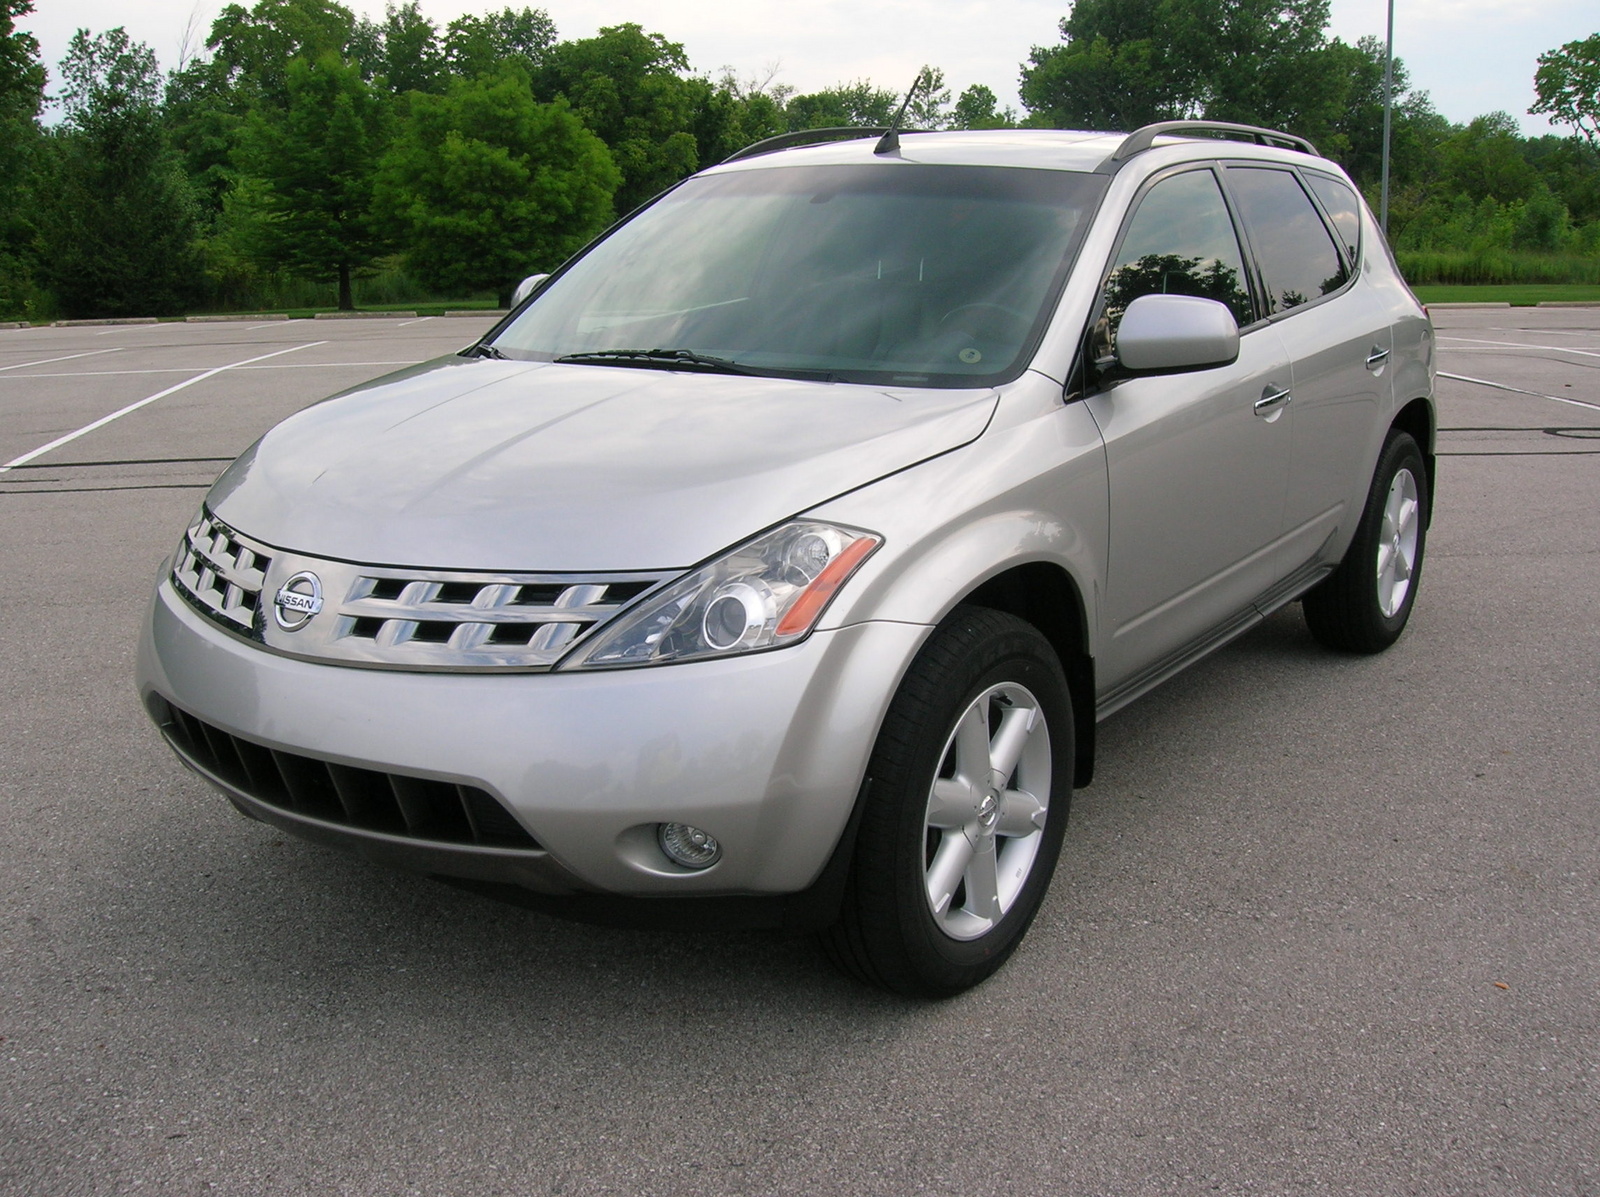 2004 Nissan murano se awd review #7